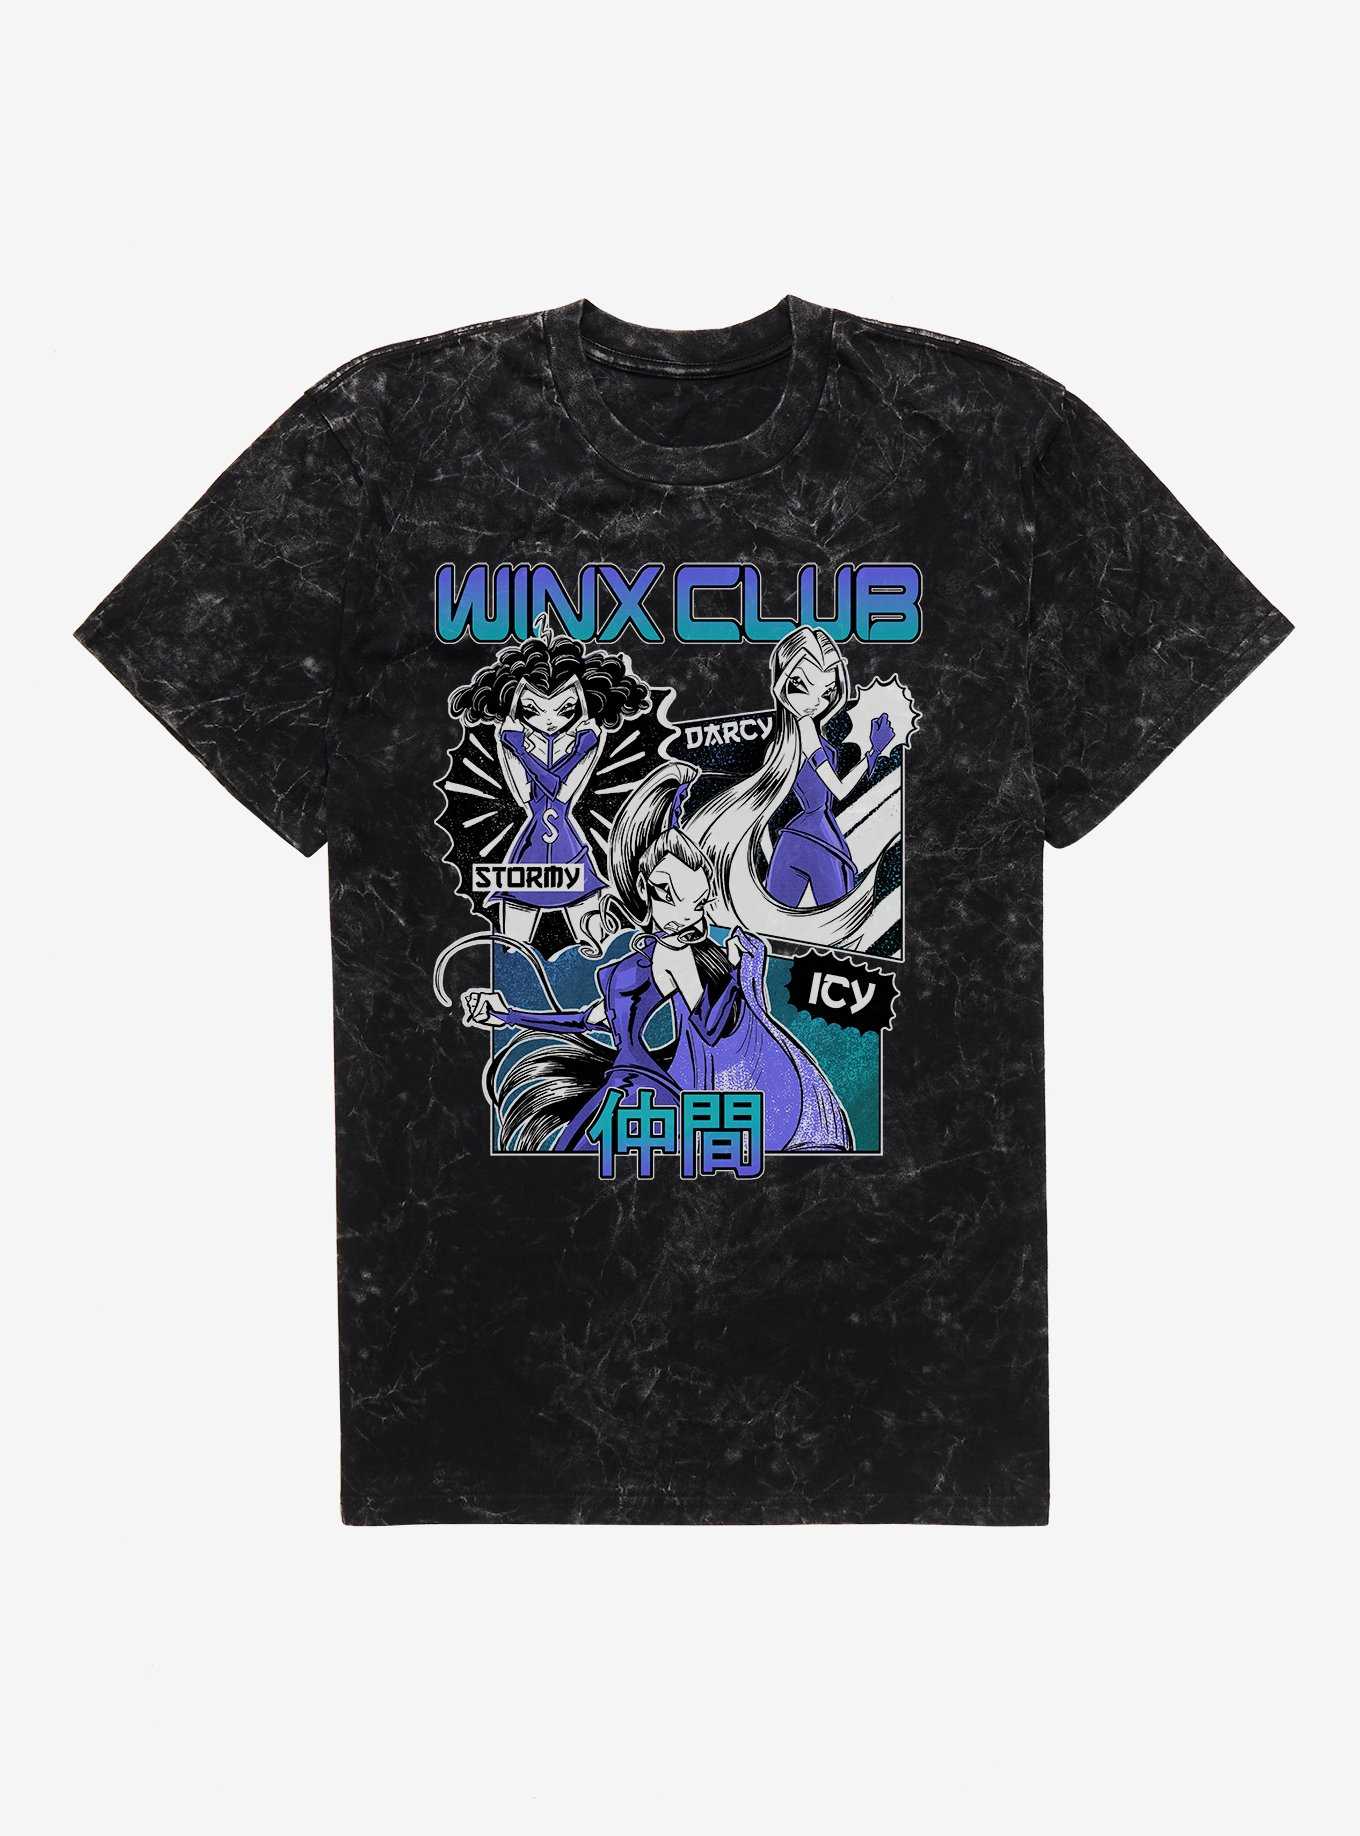 Winx Club Darcy Stormy Icy Mineral Wash T-Shirt, , hi-res